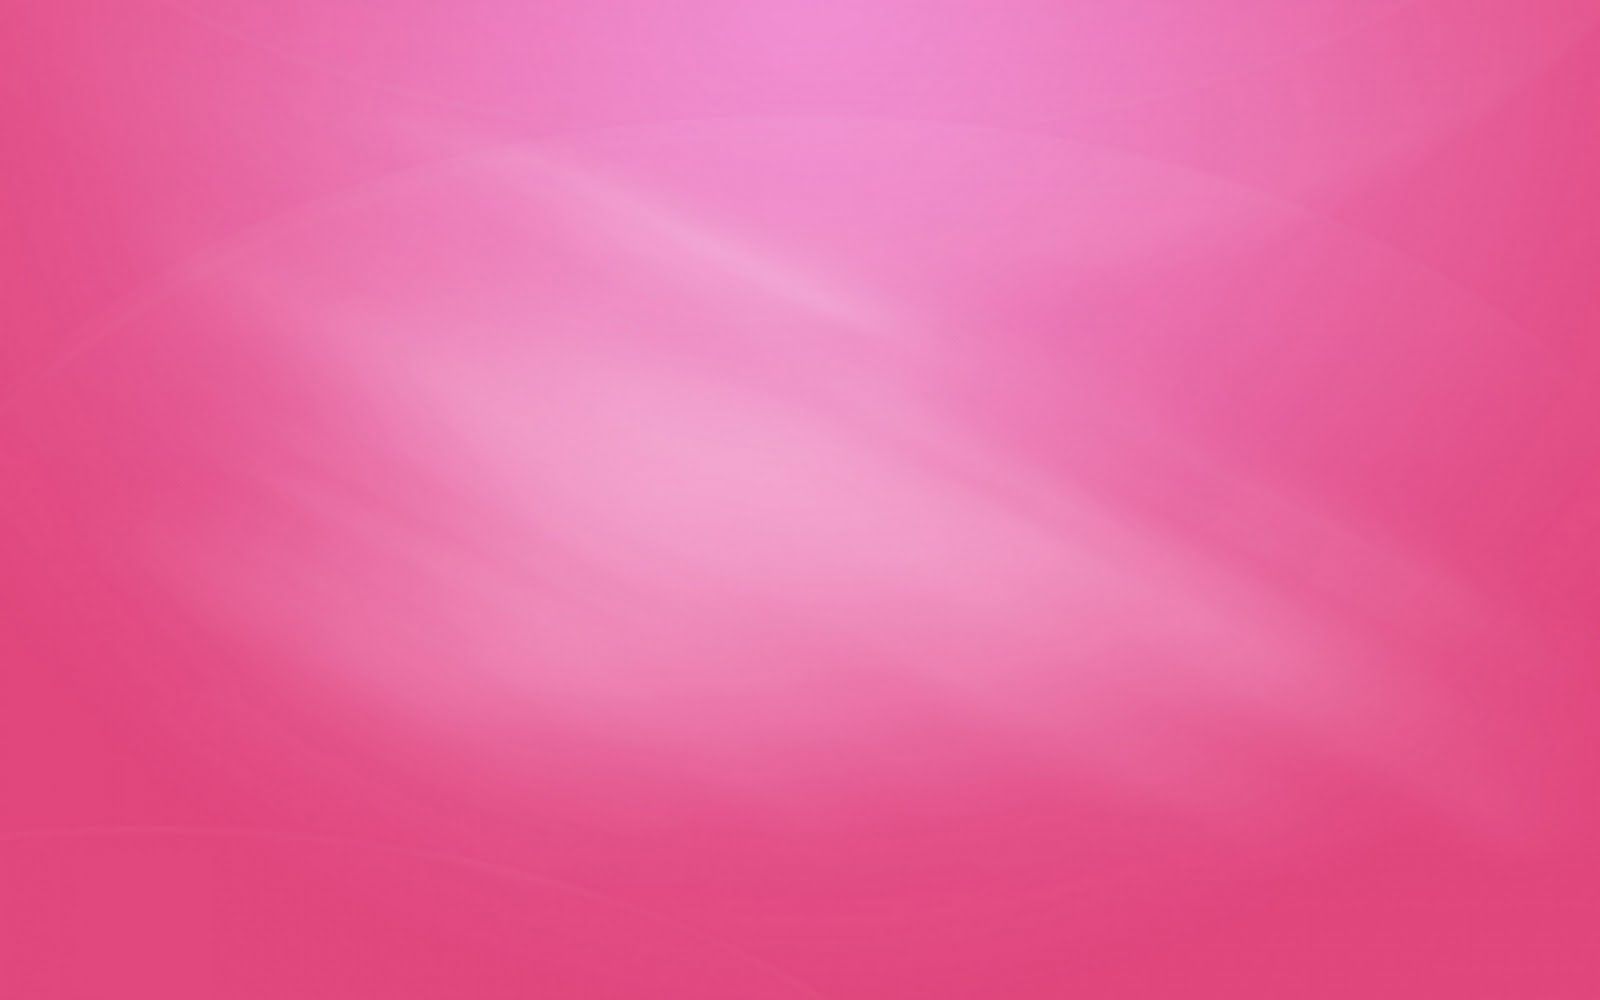 The Free Image: Pink wallpaper for computer